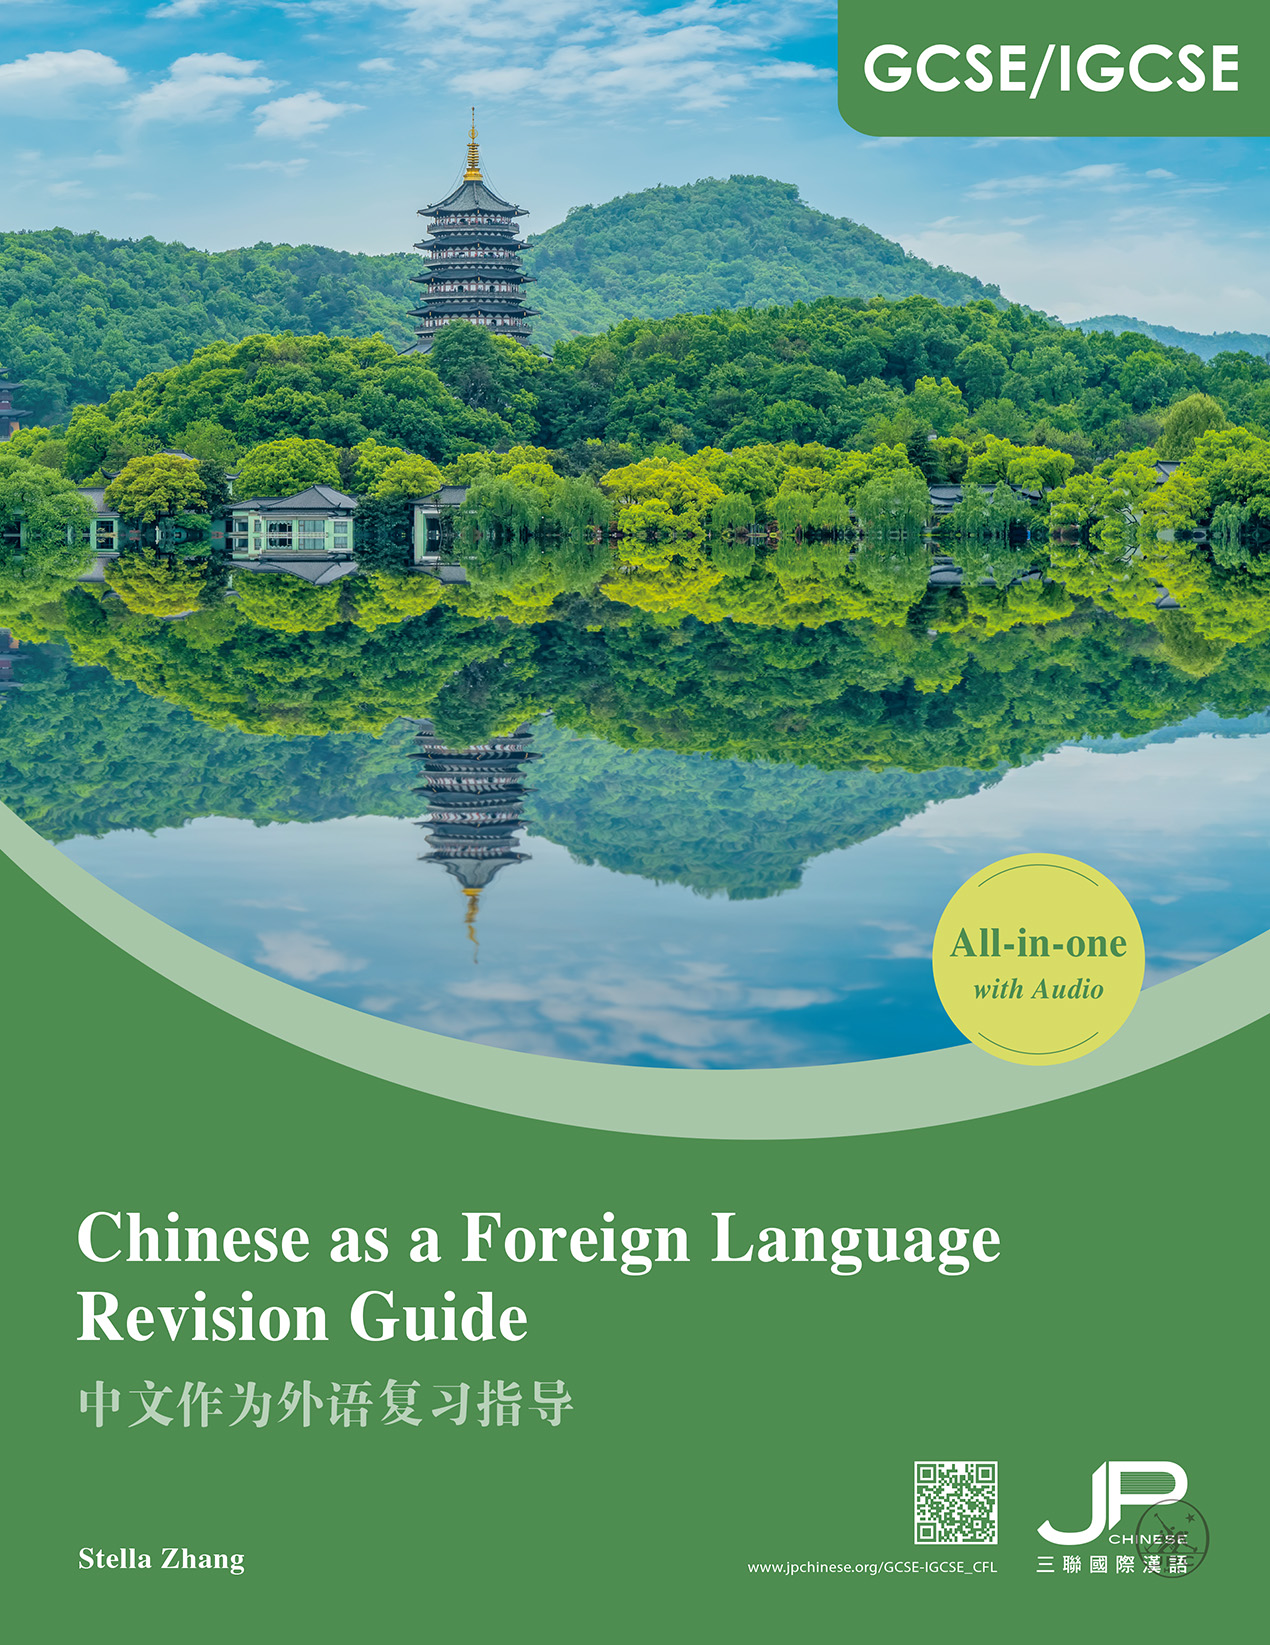 GCSE/IGCSE 中文作为外语复习指导  GCSE/IGCSE Chinese as a Foreign Language Revision Guide (Simplified Characters)